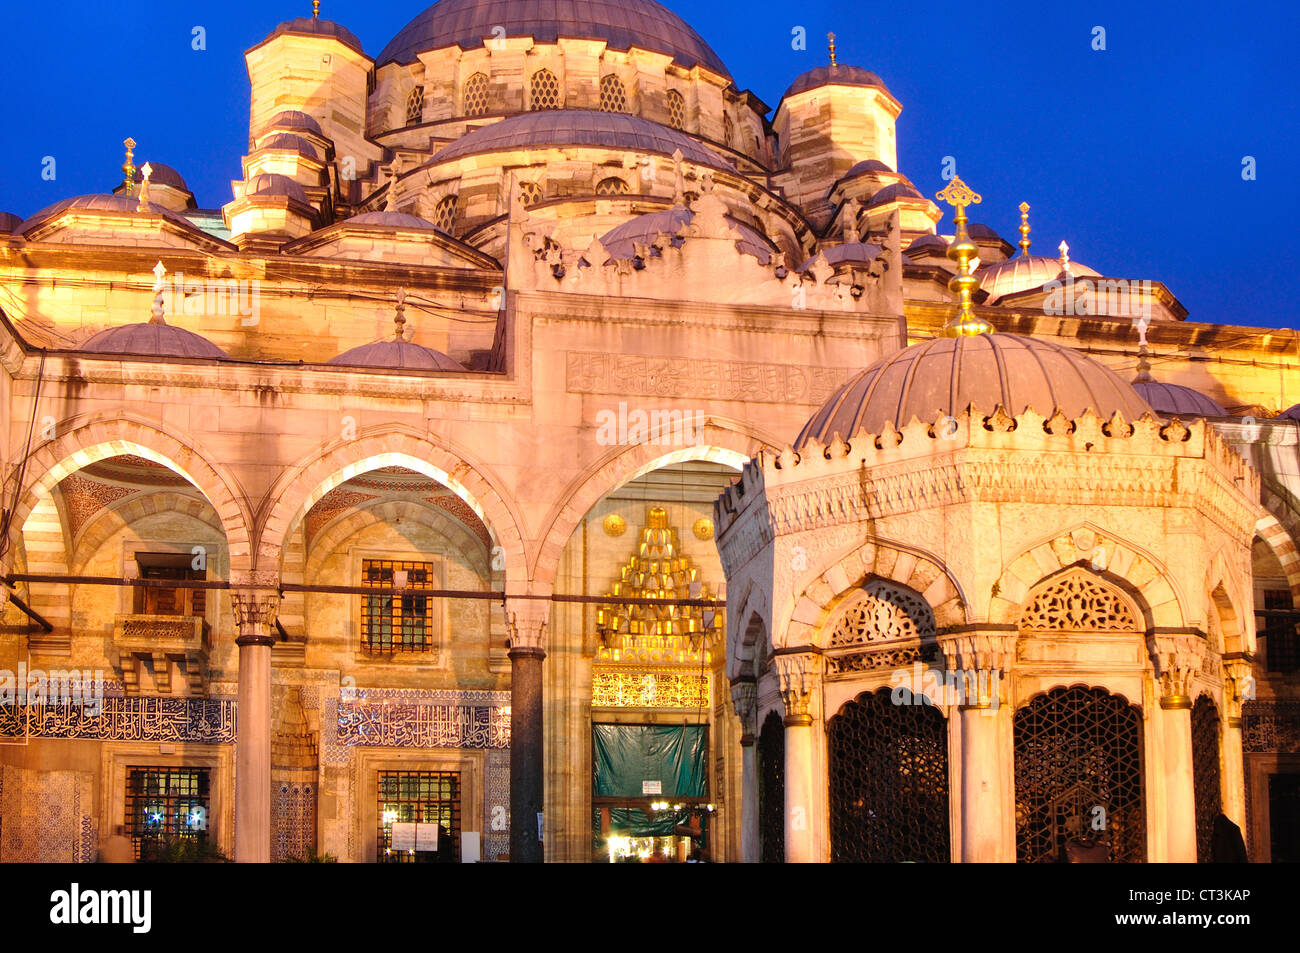 Turkey, Istanbul, The New Mosque or Mosque of the Valide Sultan at Night Stock Photo